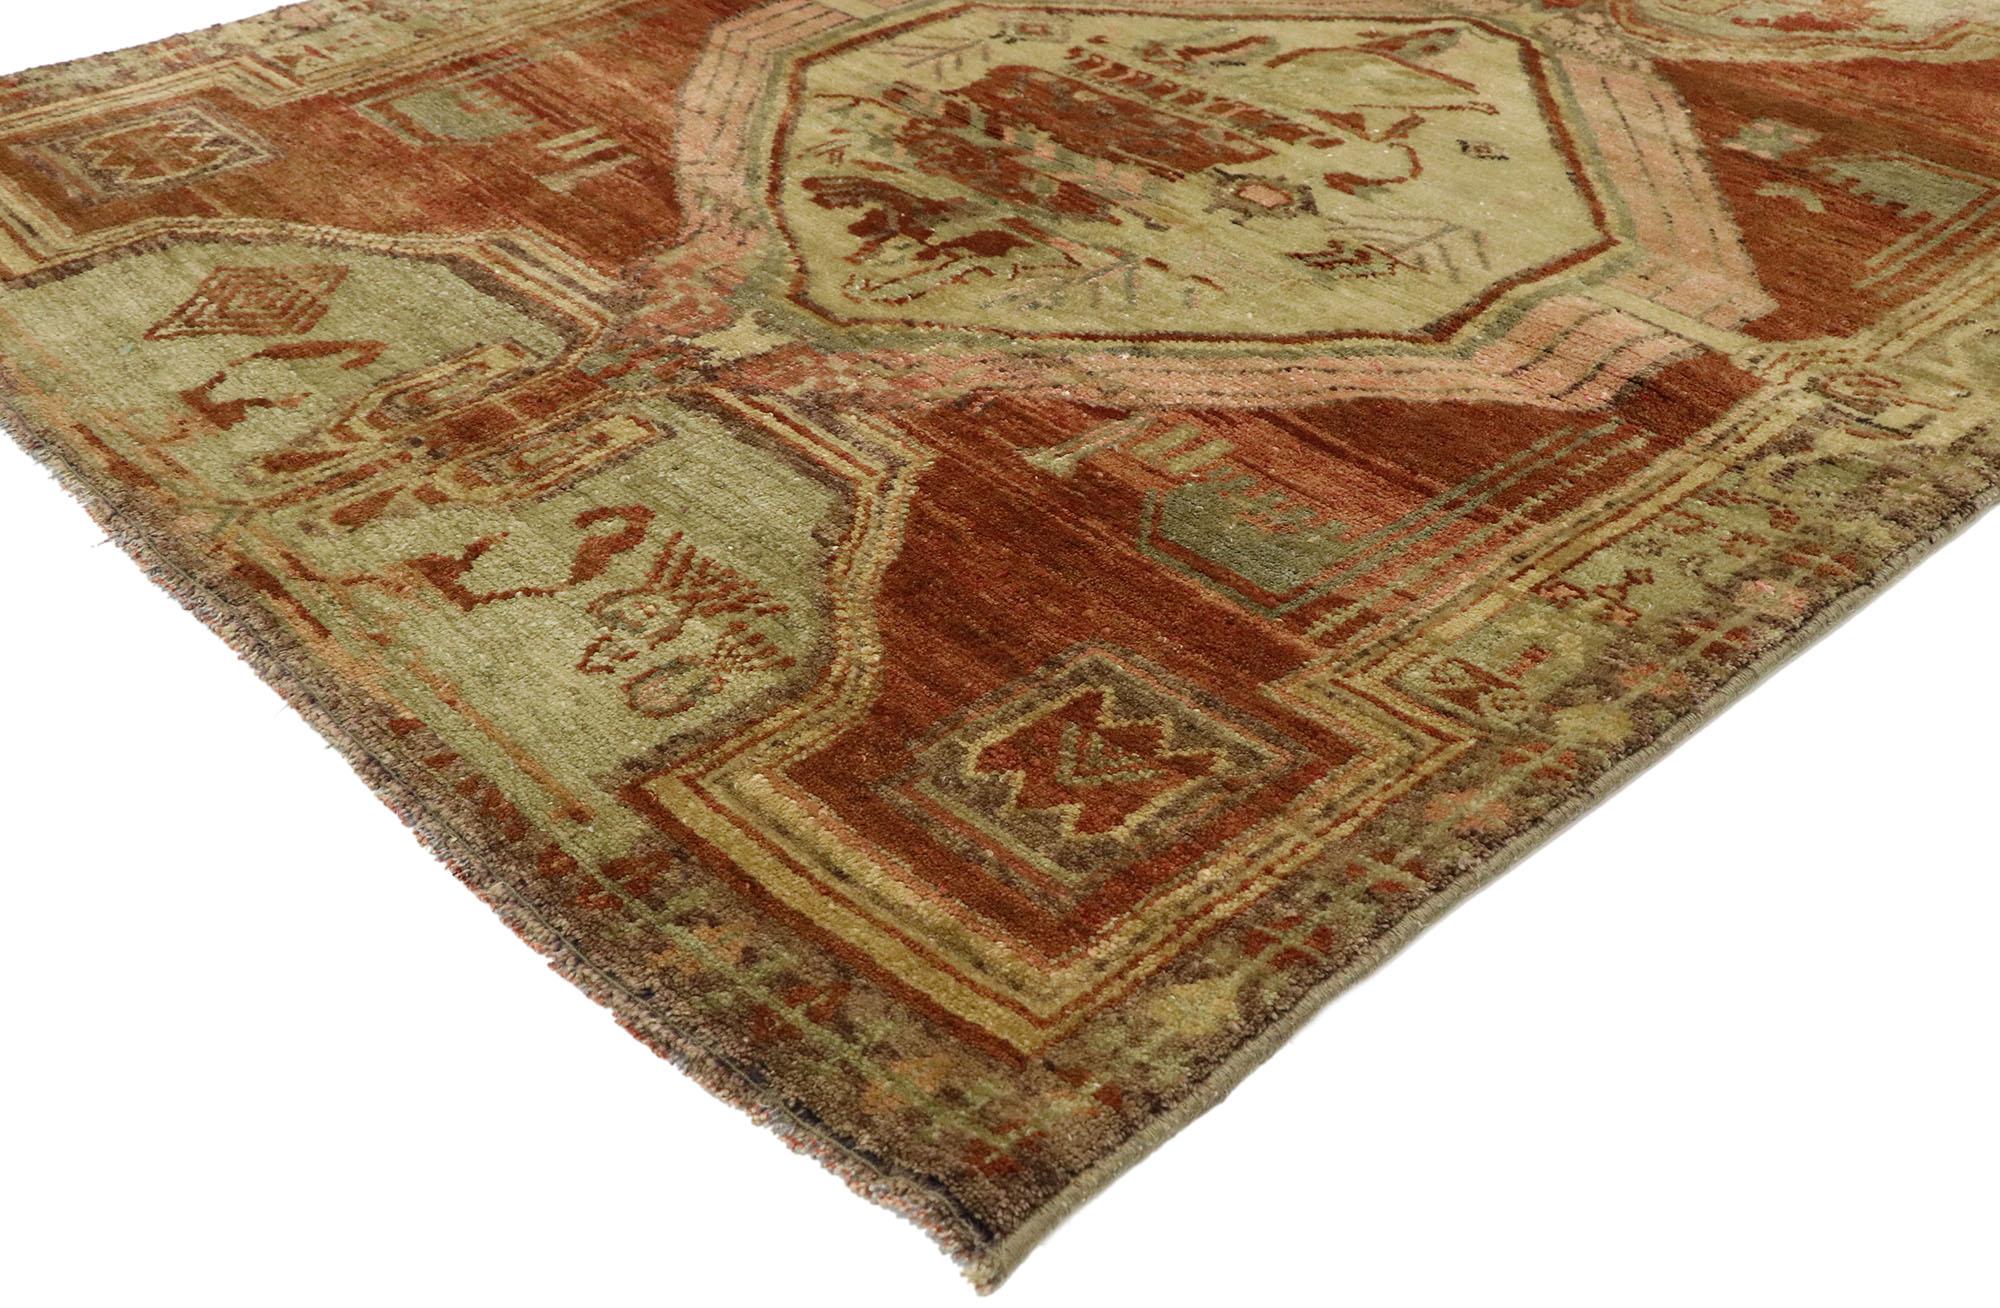 52104 Distressed Vintage Turkish Oushak Accent Rug with Modern Rustic Style 03'10 x 04'03. Warm and inviting, this hand-knotted wool distressed vintage Turkish Oushak rug beautifully embodies a modern rustic style. Immersed in Anatolian history and